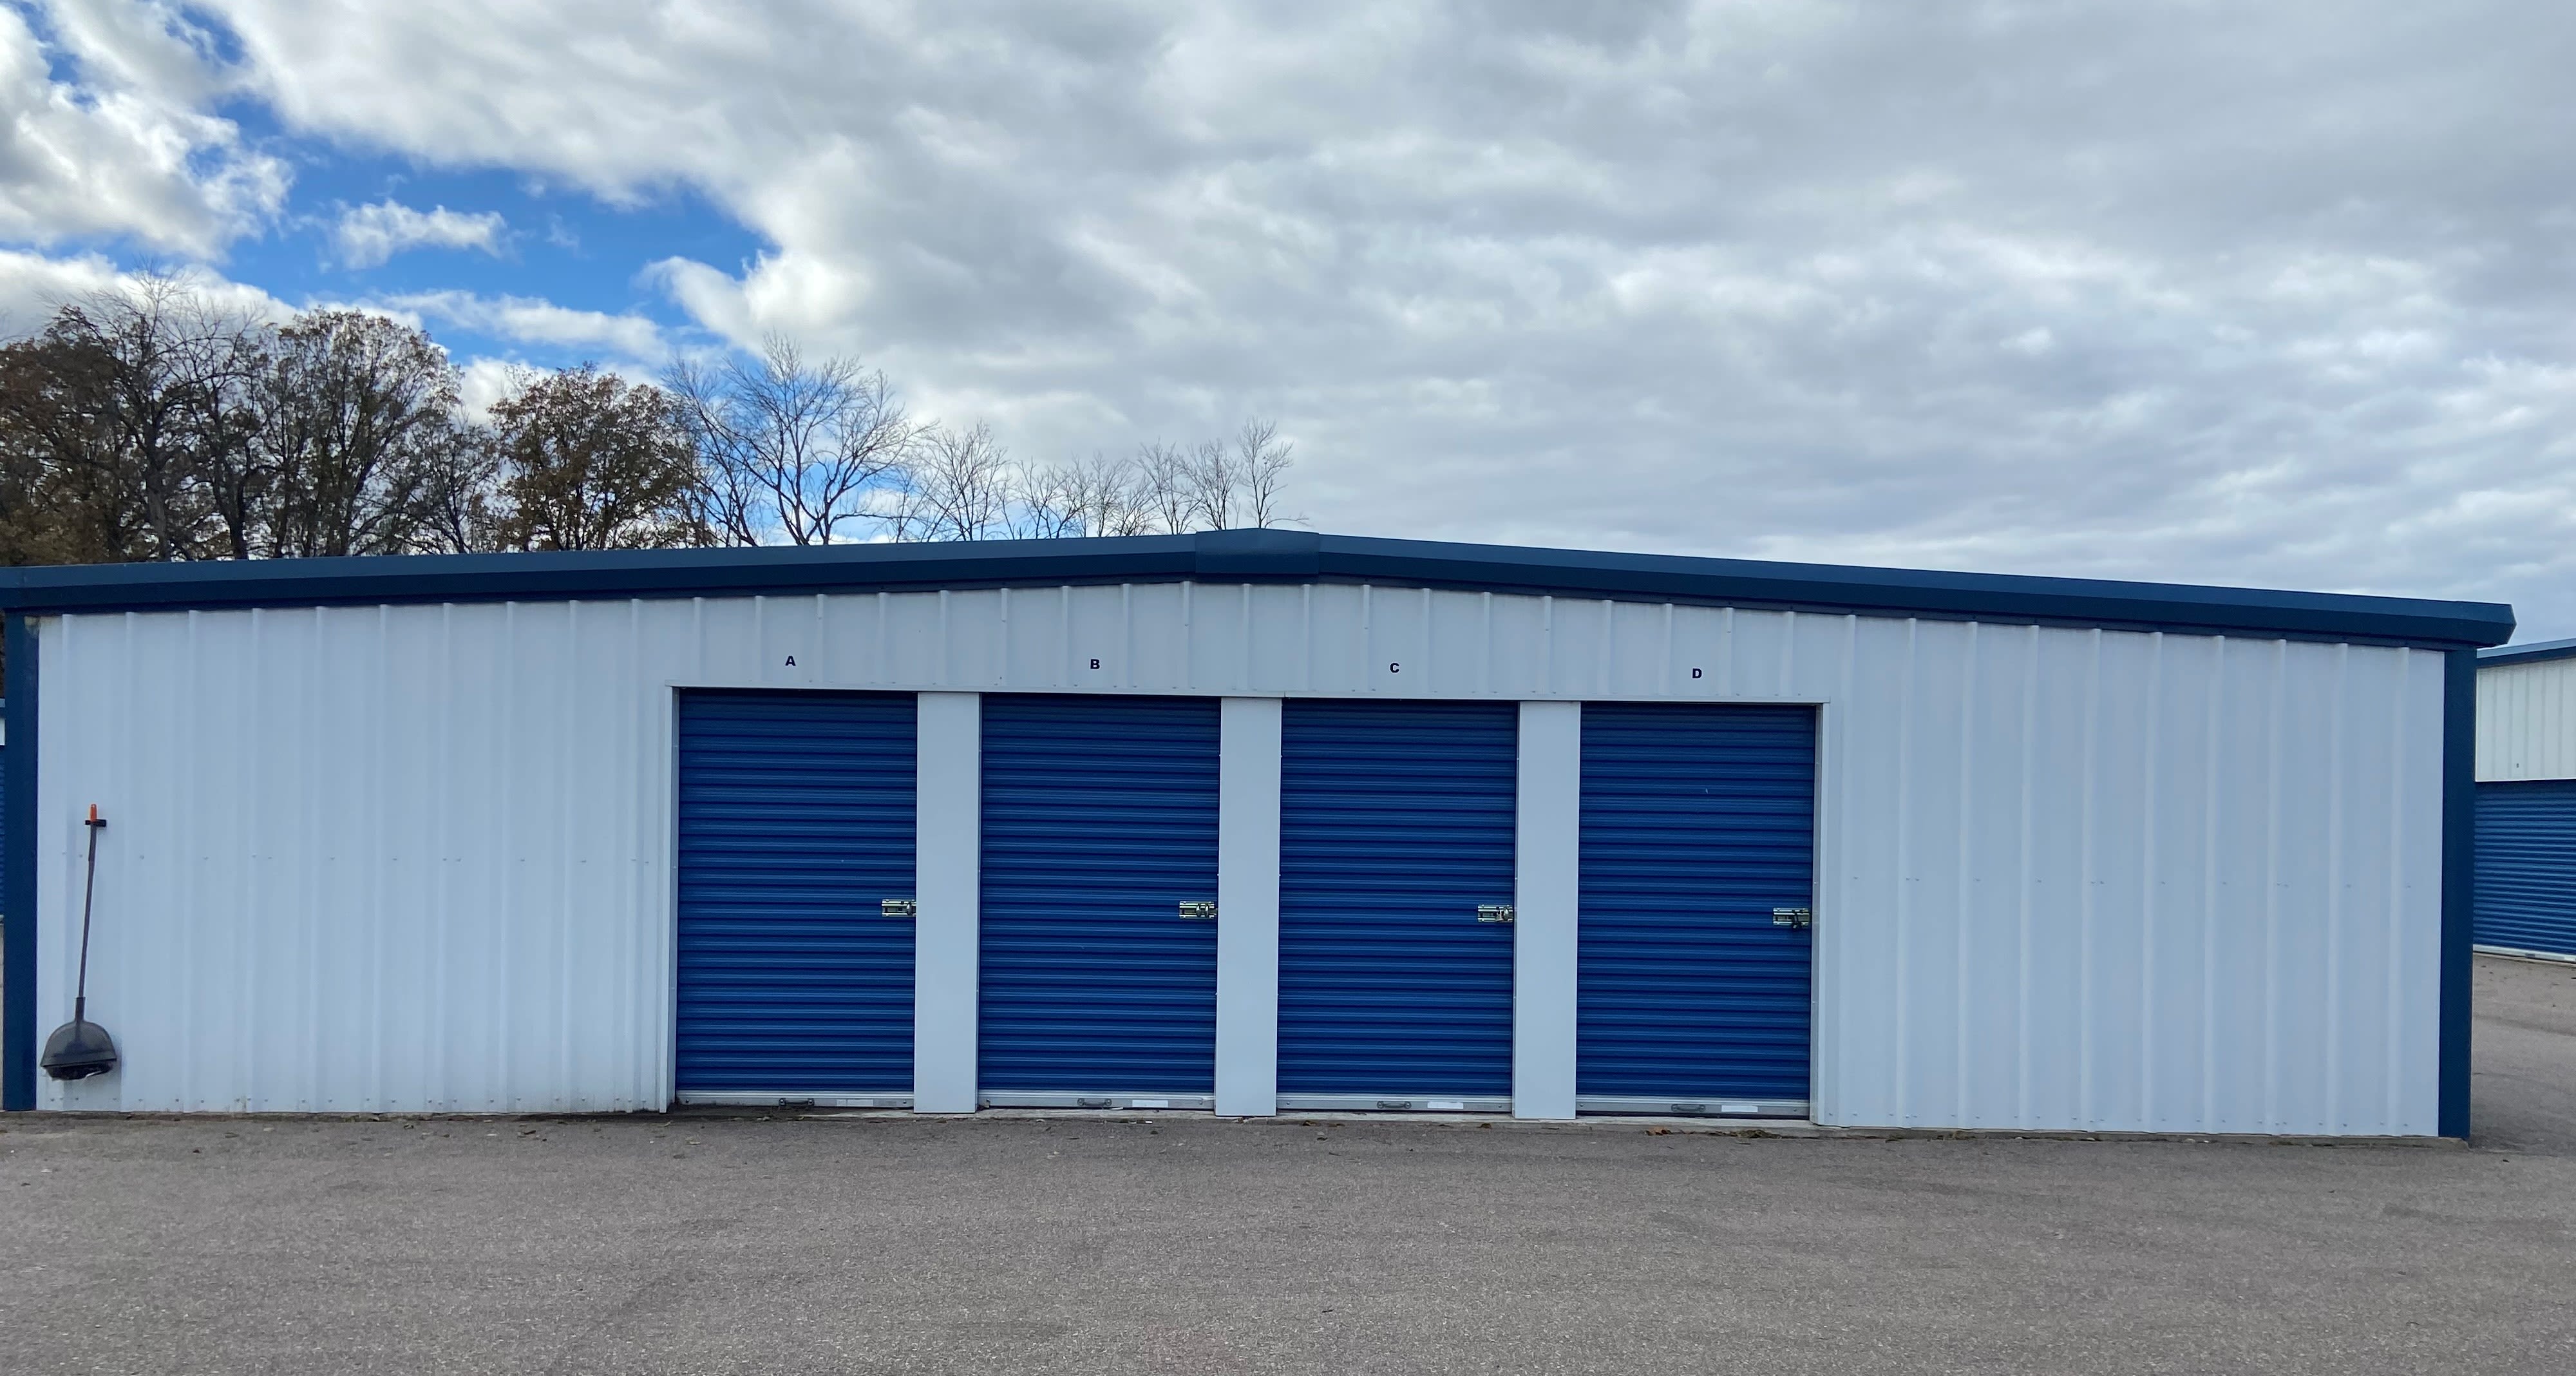 Learn more about features at KO Storage in Wisconsin Dells, Wisconsin